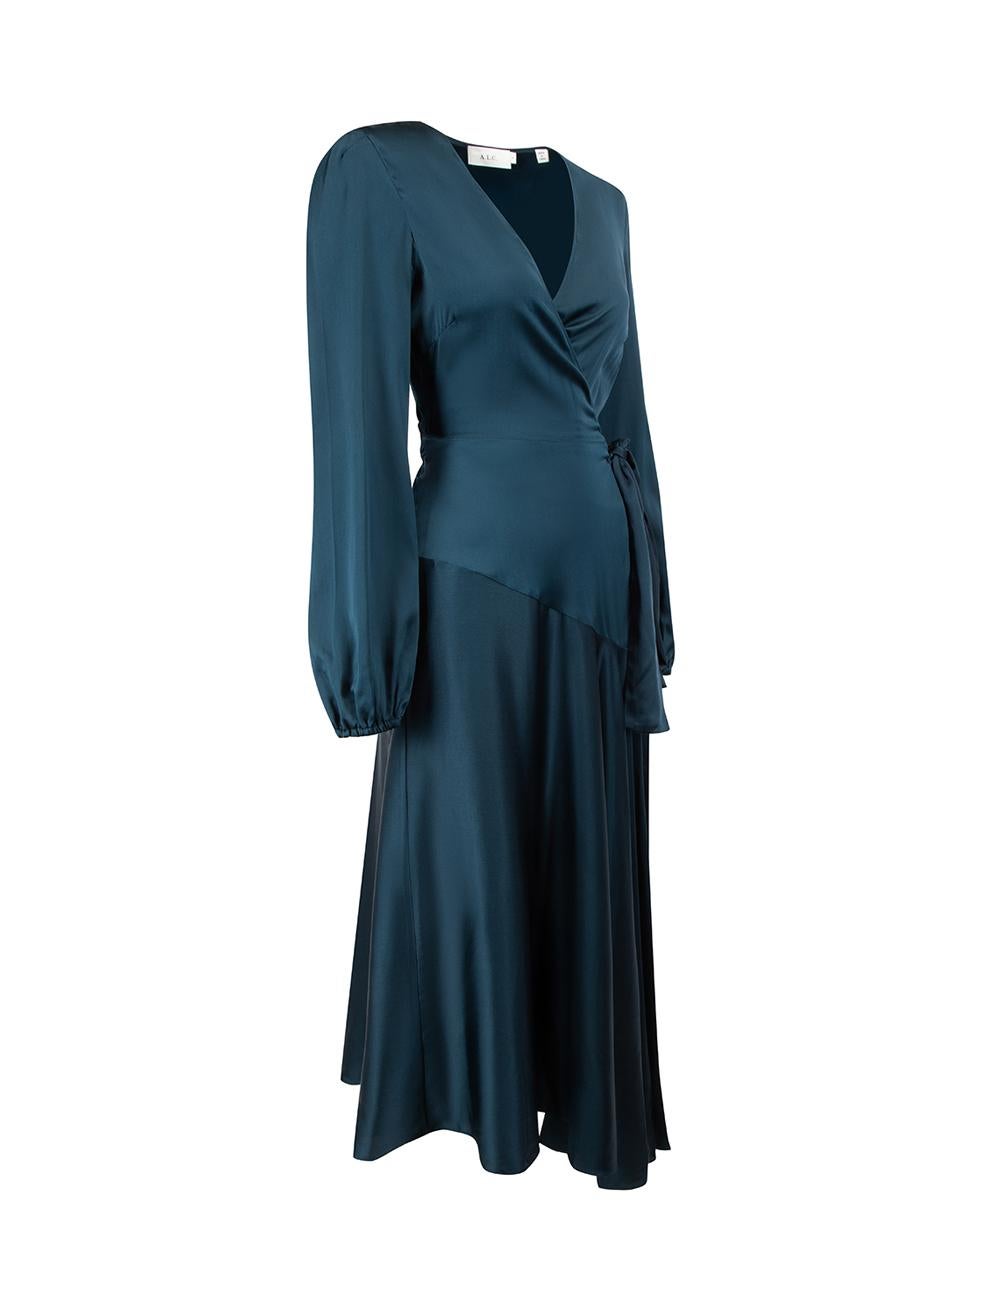 CONDITION is Very good. Hardly any visible wear to dress is evident on this used A.L.C designer resale item.




Details


Dark teal

Silk

Midi wrap dress

V neckline

Tie strap closure on waist

Elasticated on cuffs





Made in